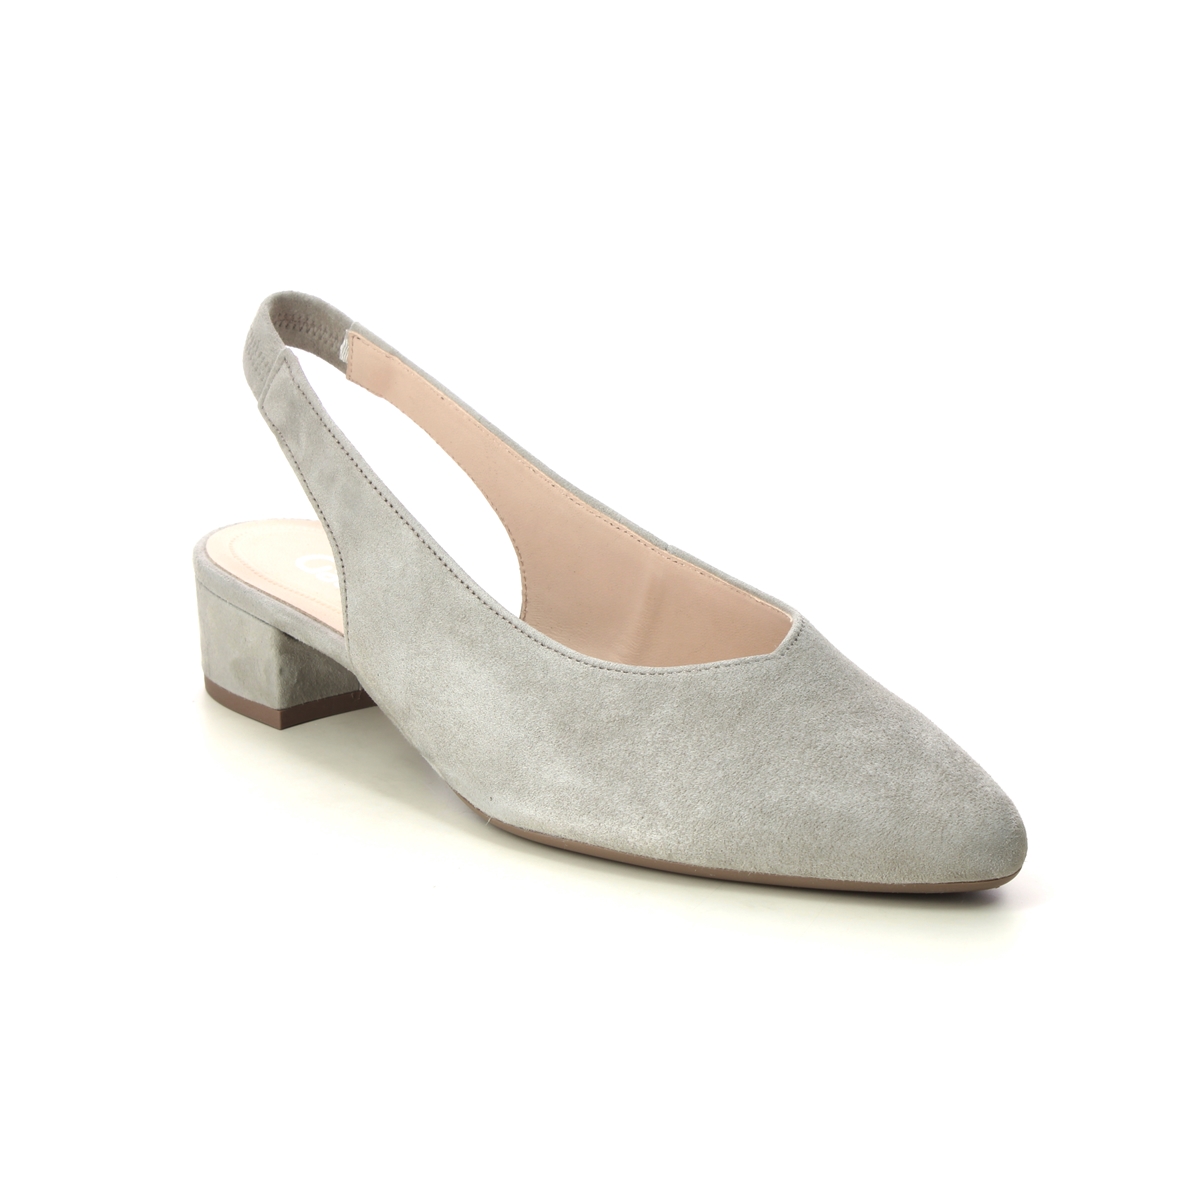 Gabor Mack Light Taupe suede Womens Slingback Shoes 41.520.12 in a Plain Leather in Size 7.5